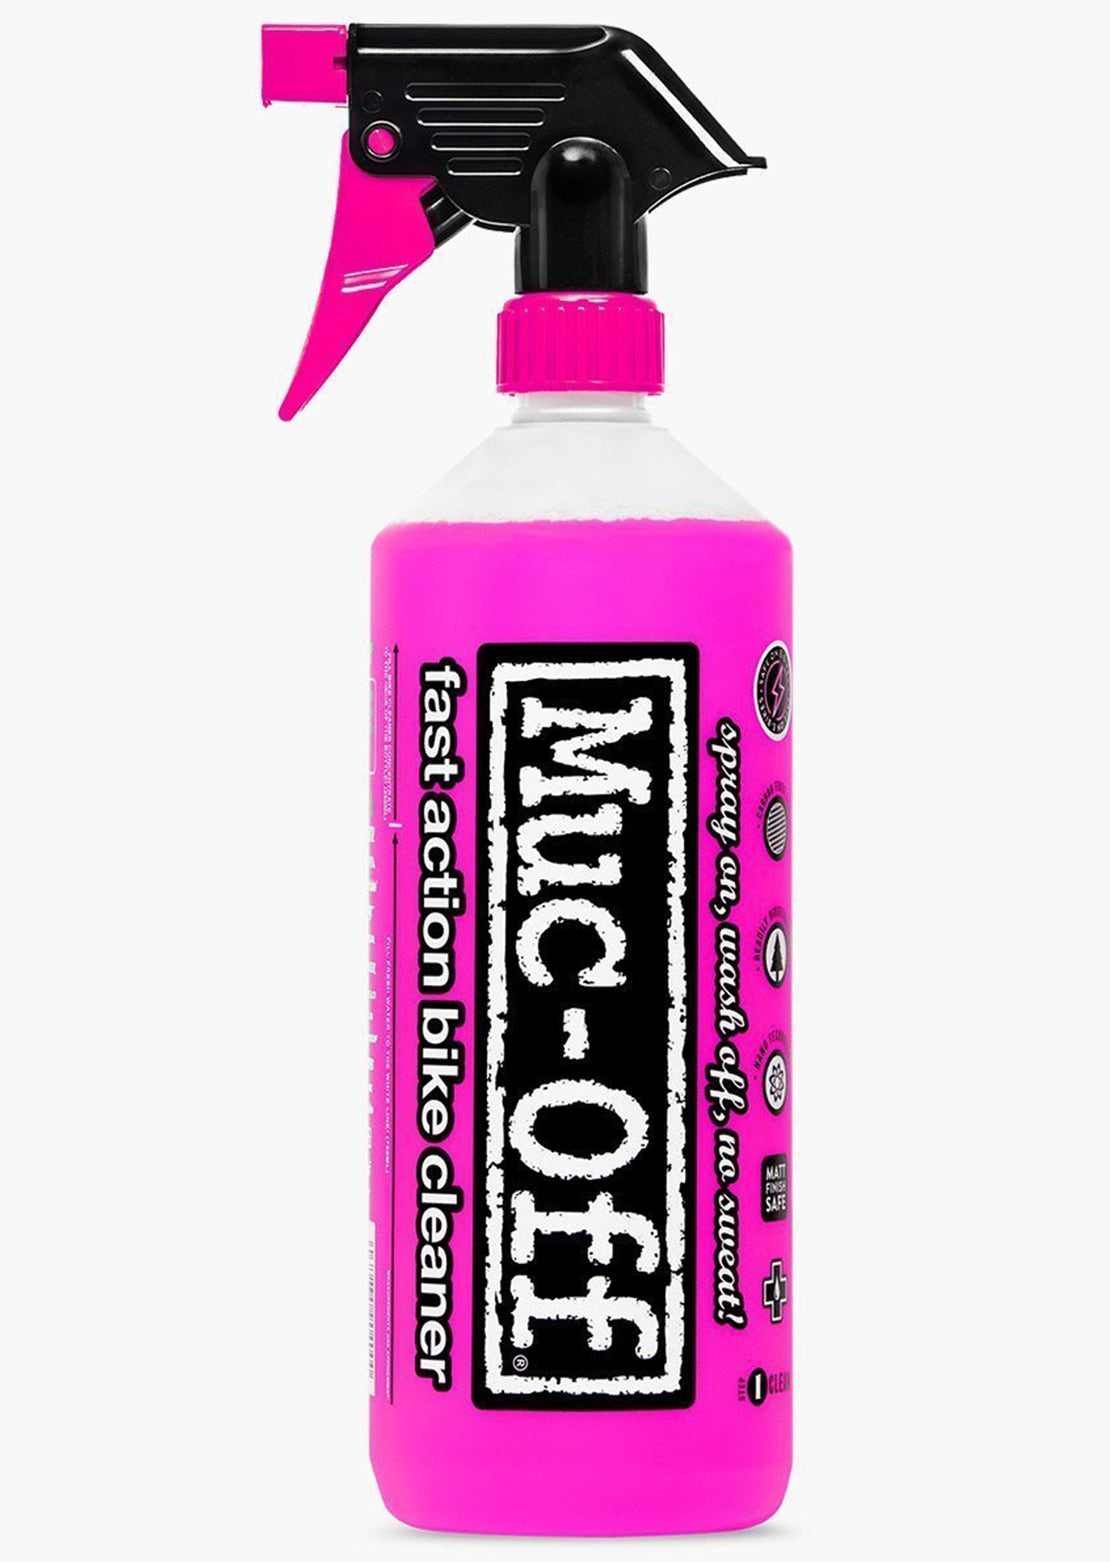 Muc-Off 8-in-1 Bike Cleaning Kit Cleaner